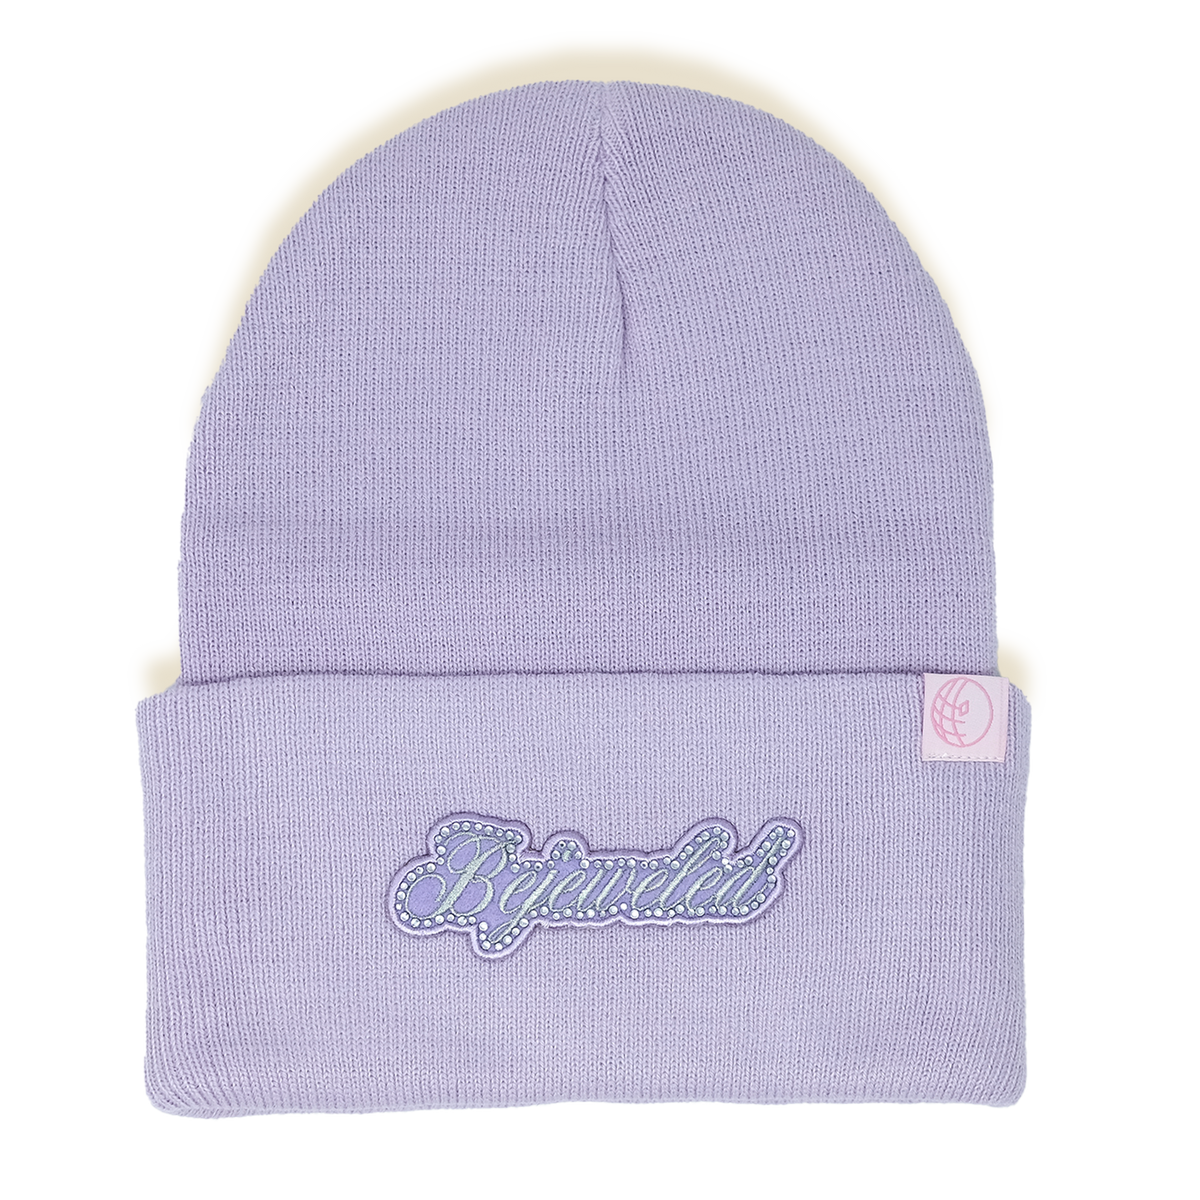 Bejeweled Patch Beanie